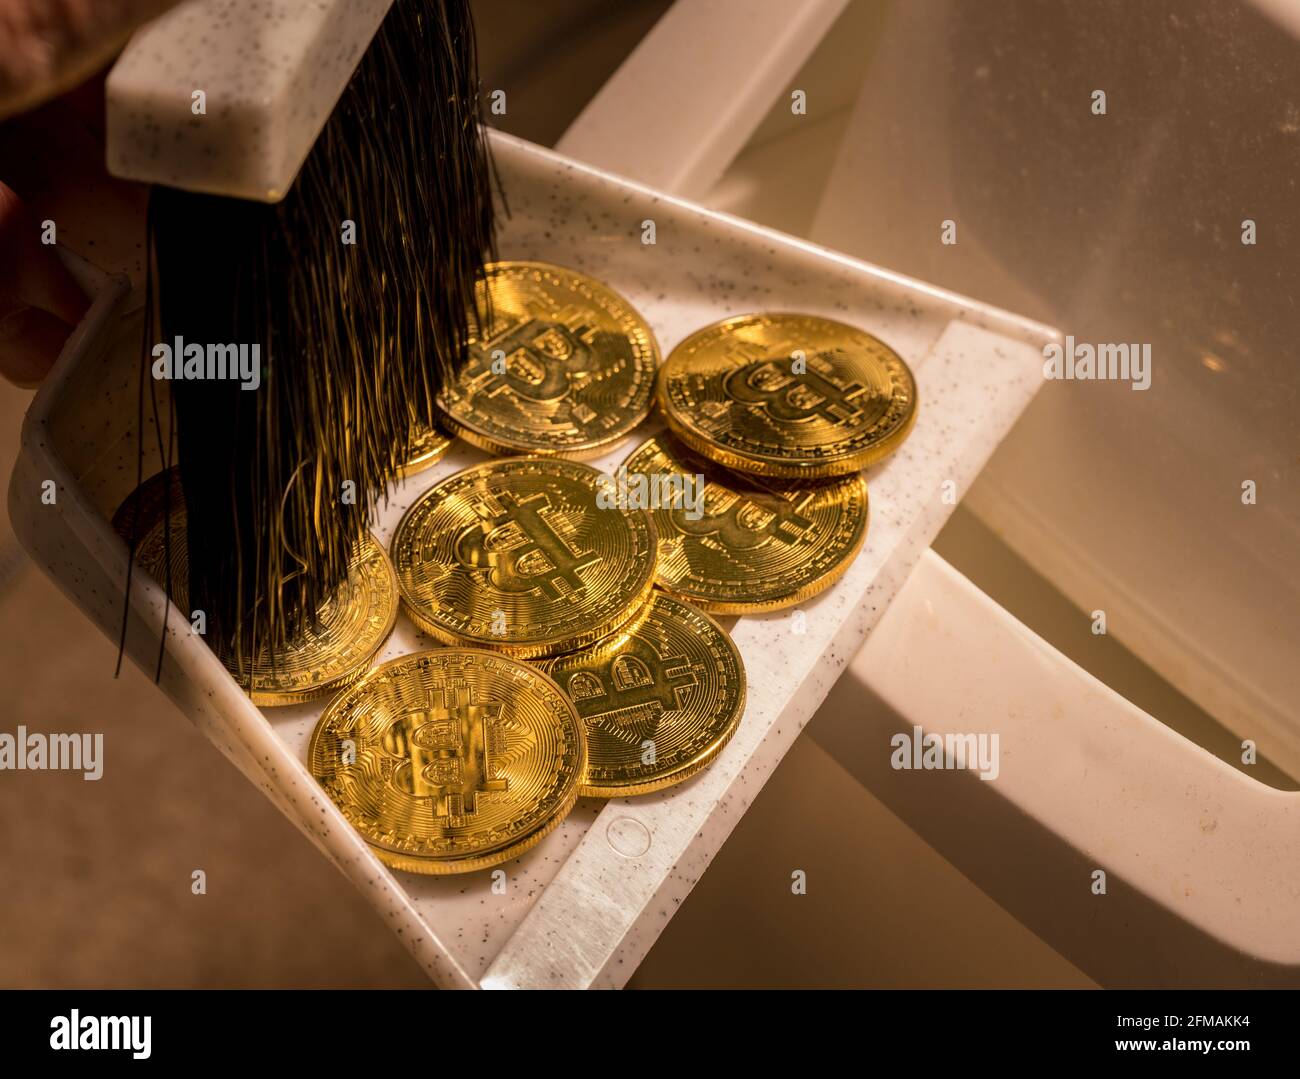 Brushing bitcoins into a dustpan as concept for the collapse in value of cyber coins and digital currency Stock Photo